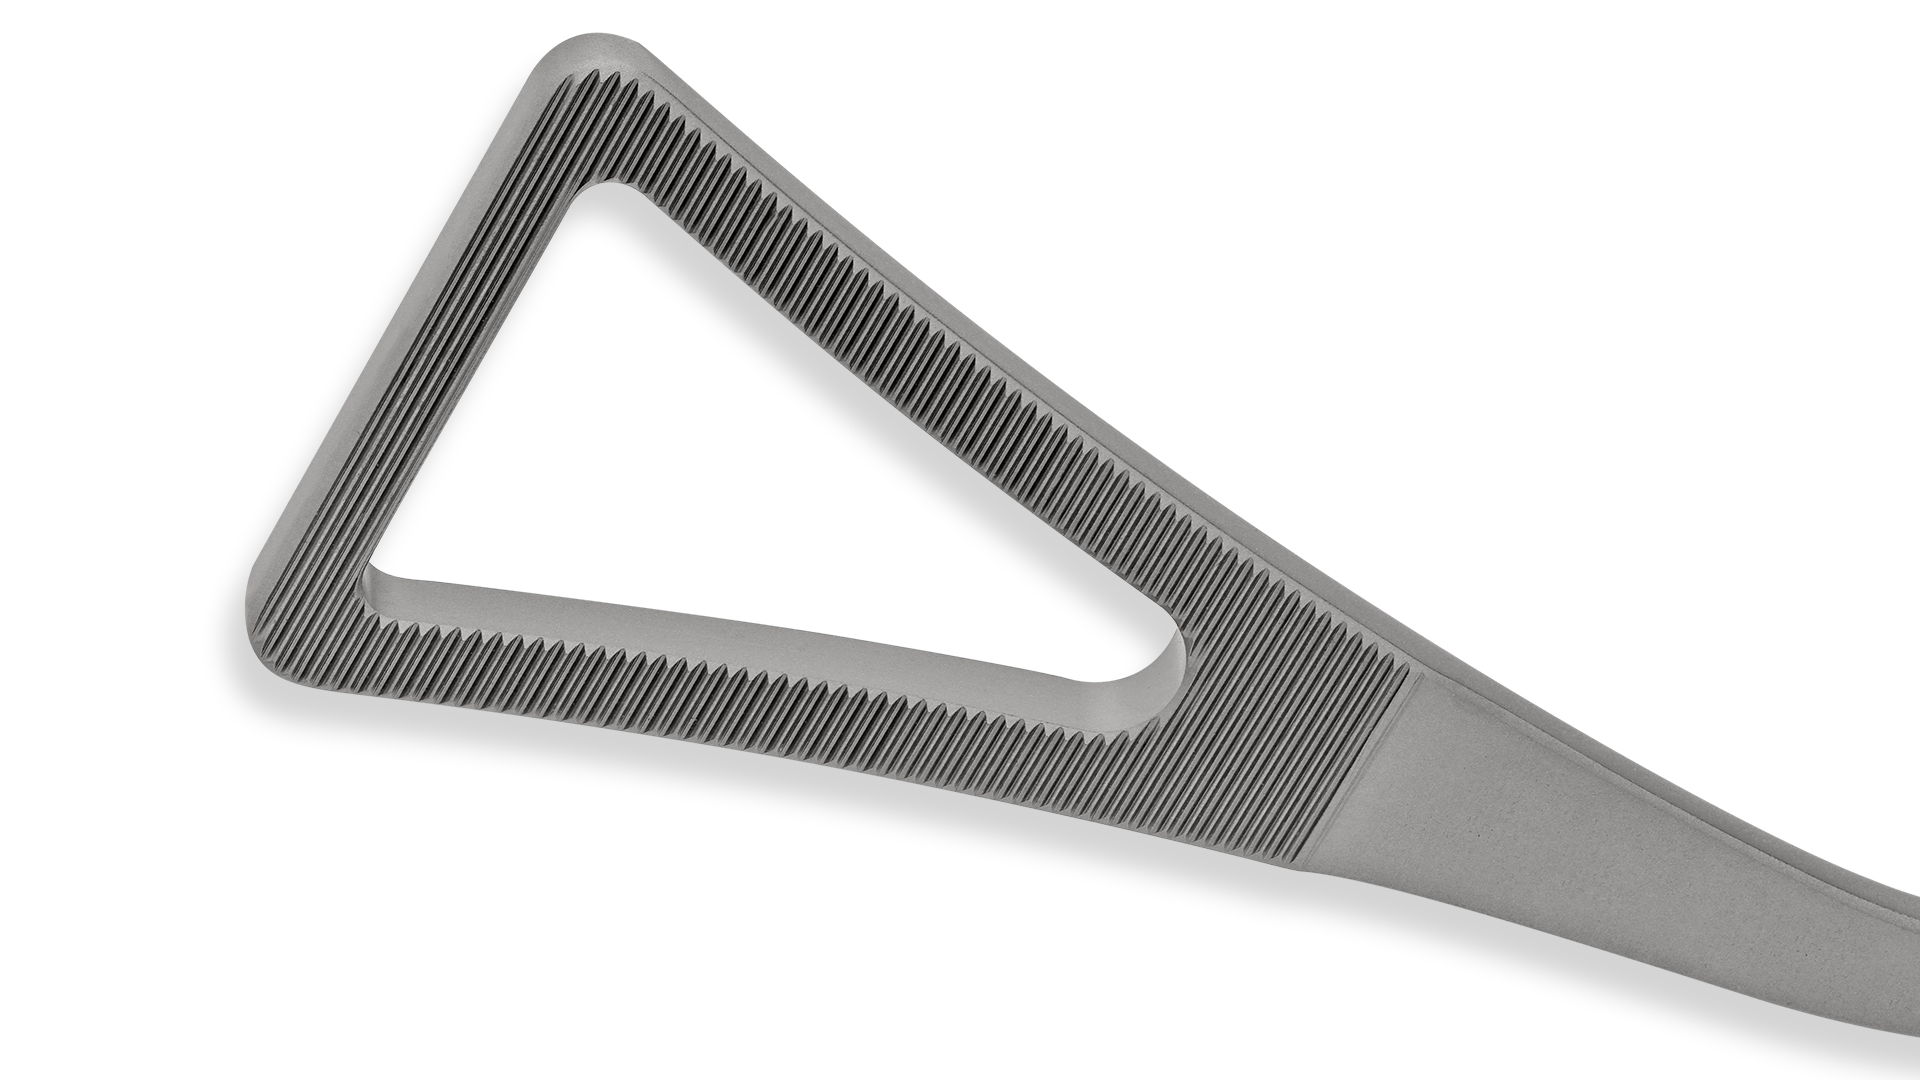 EPIC VATS Duval Clamp – Curved Left 15mm Triangular Serrated ring jaws